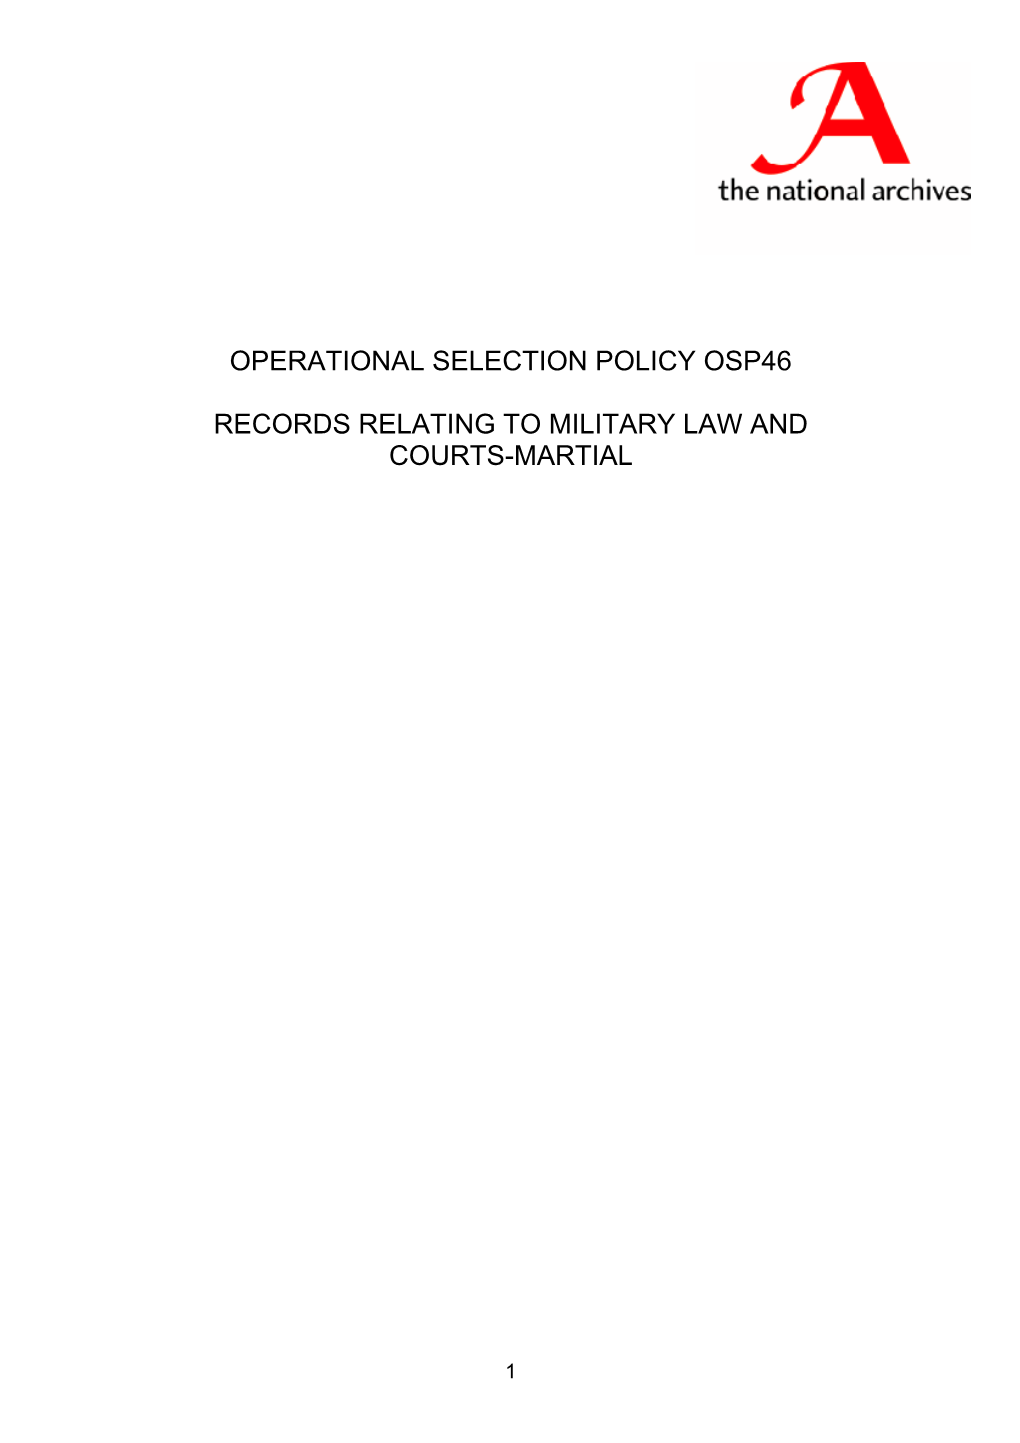 OSP46: Records Relating to Military Law and Courts-Martial